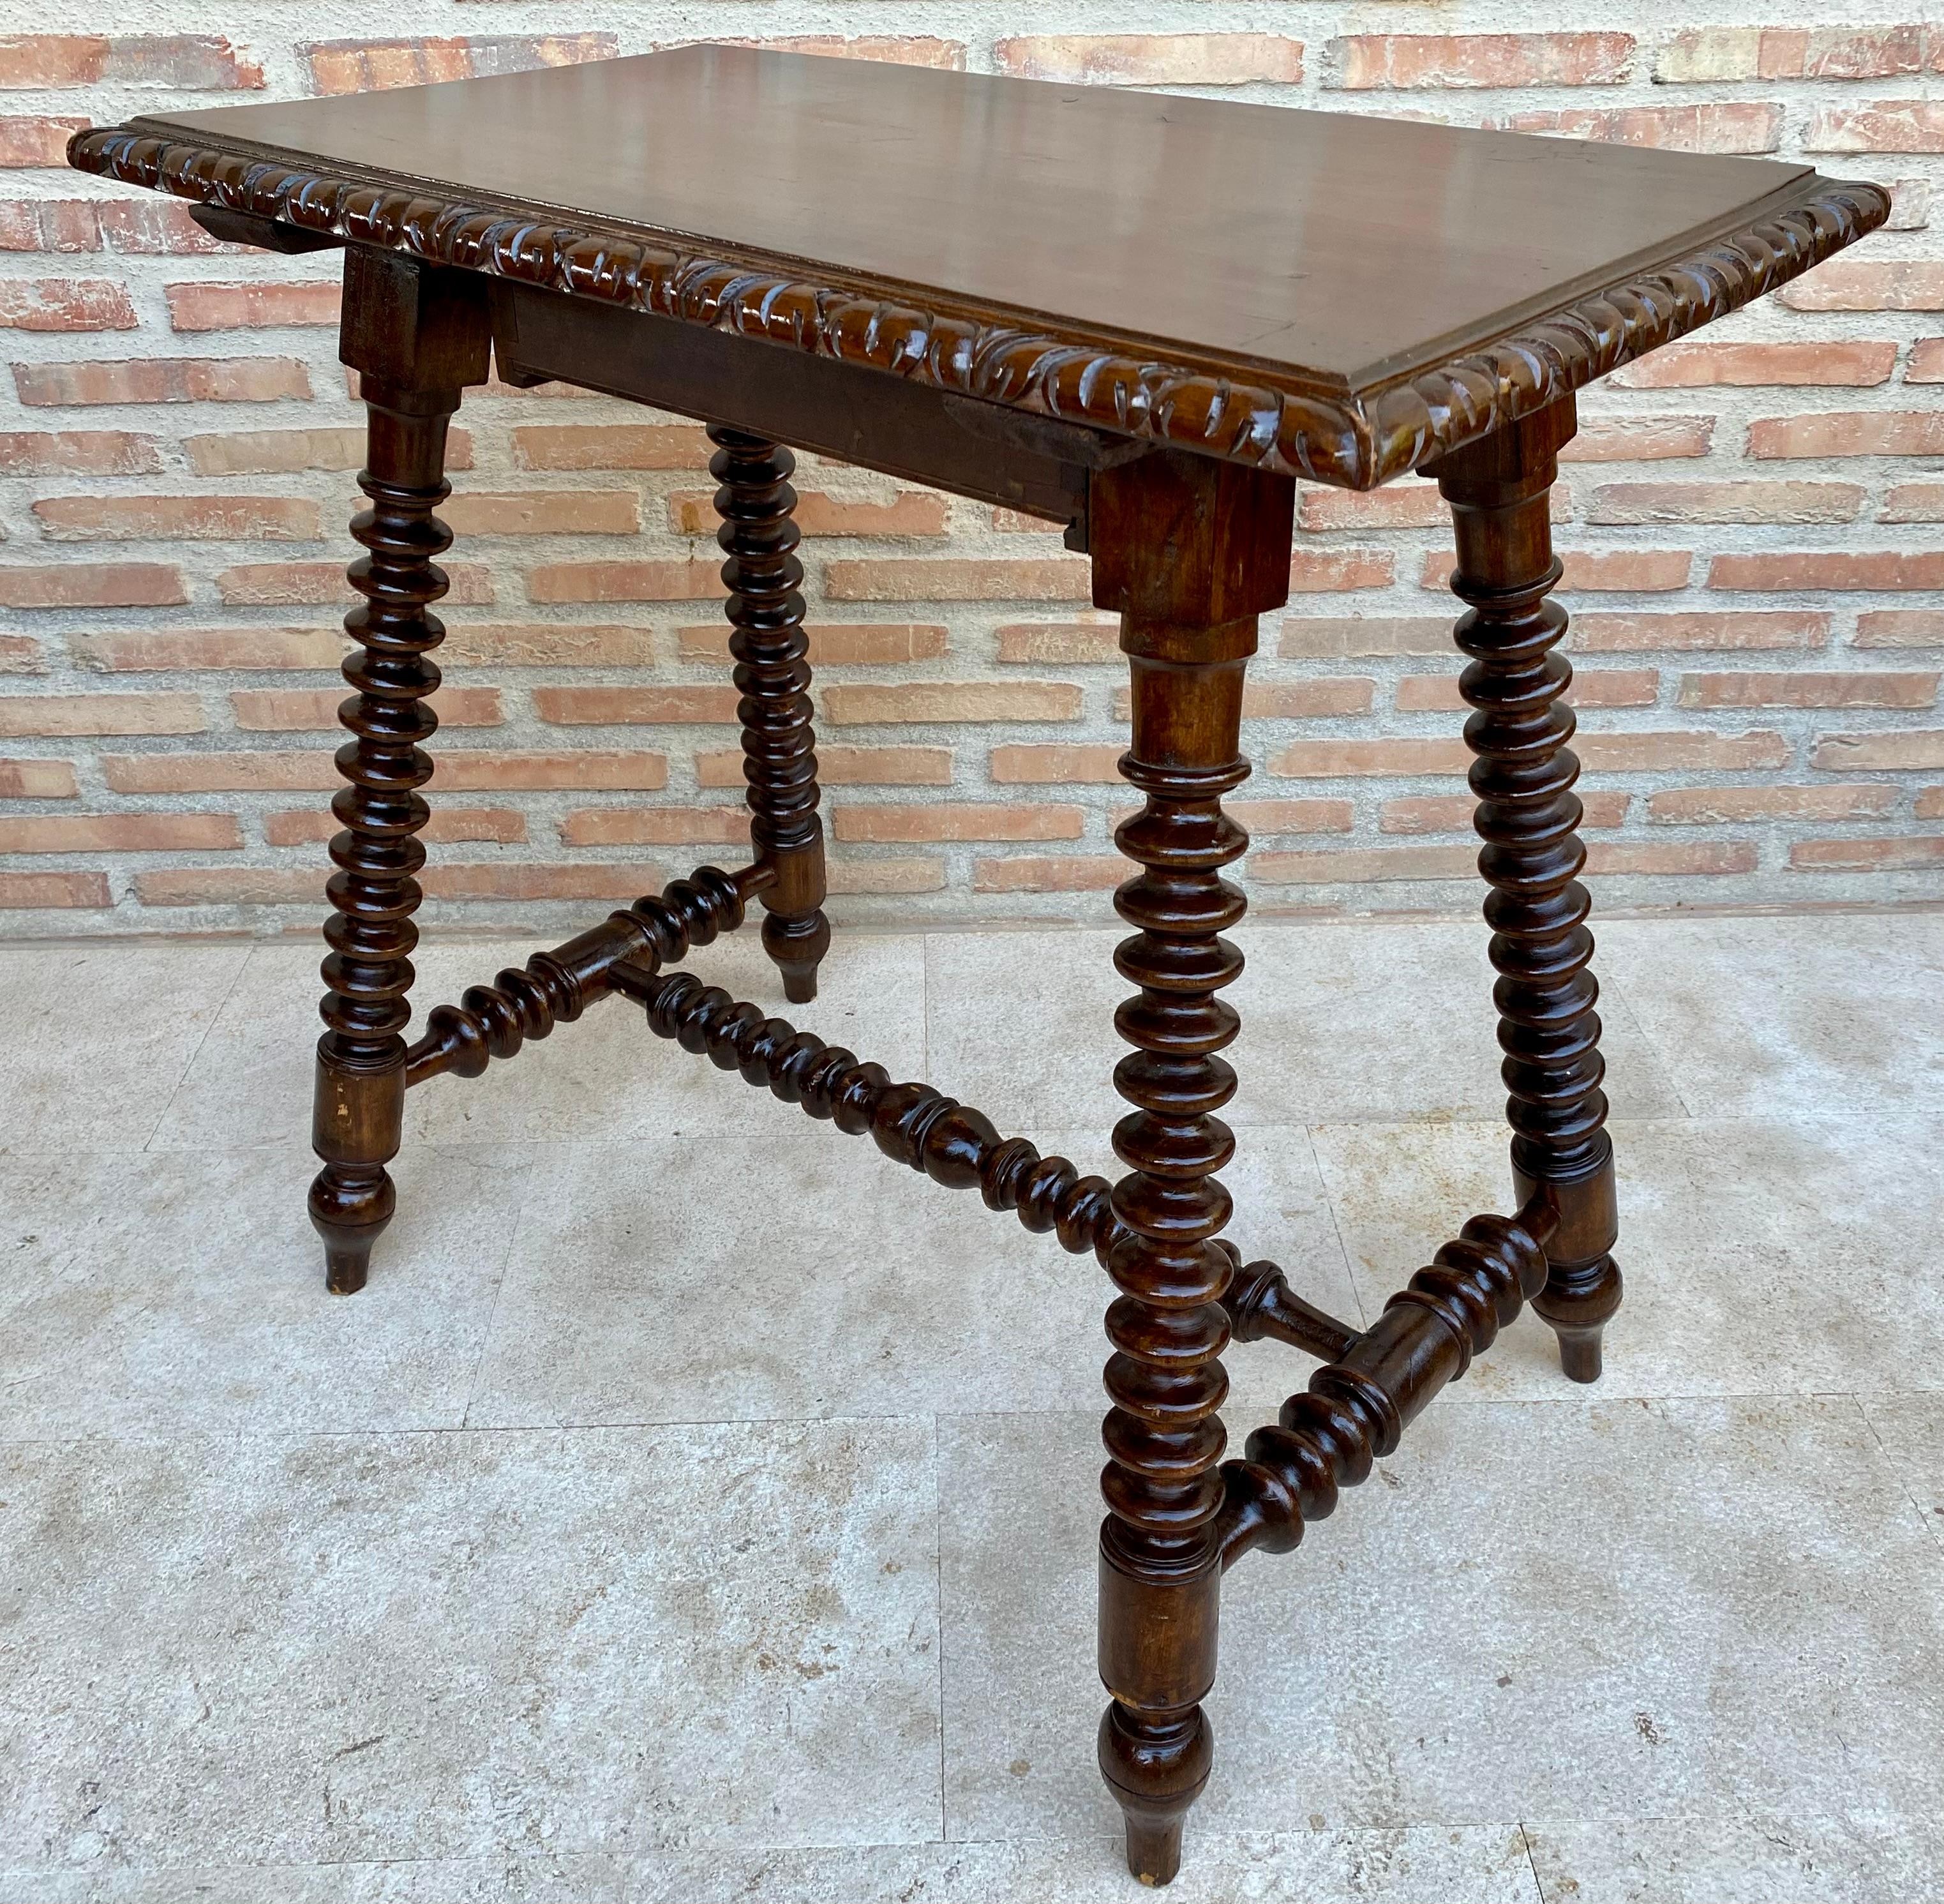 Mid 20th Century French Walnut Carved Side Table with Turned Legs and Stretcher For Sale 3